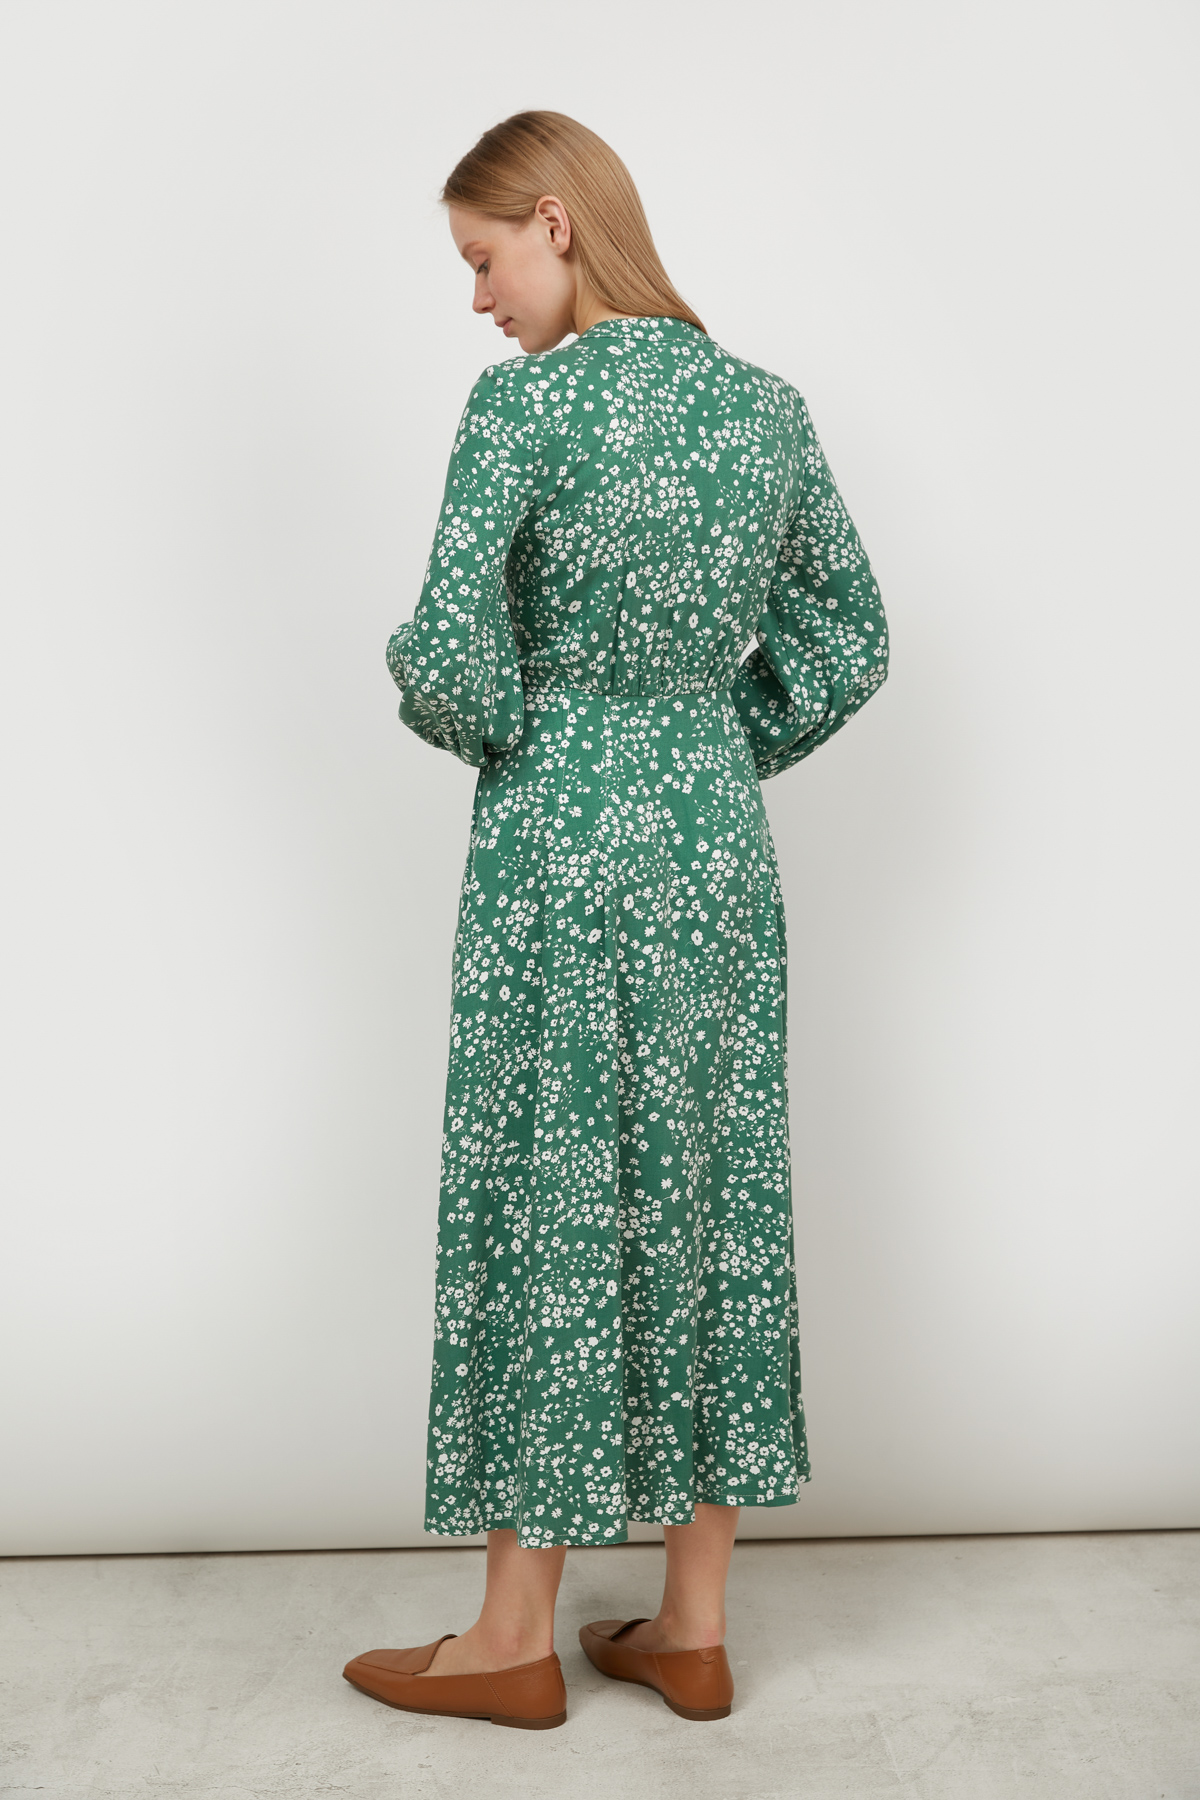 Midi dress with viscose green in flowers print, photo 4